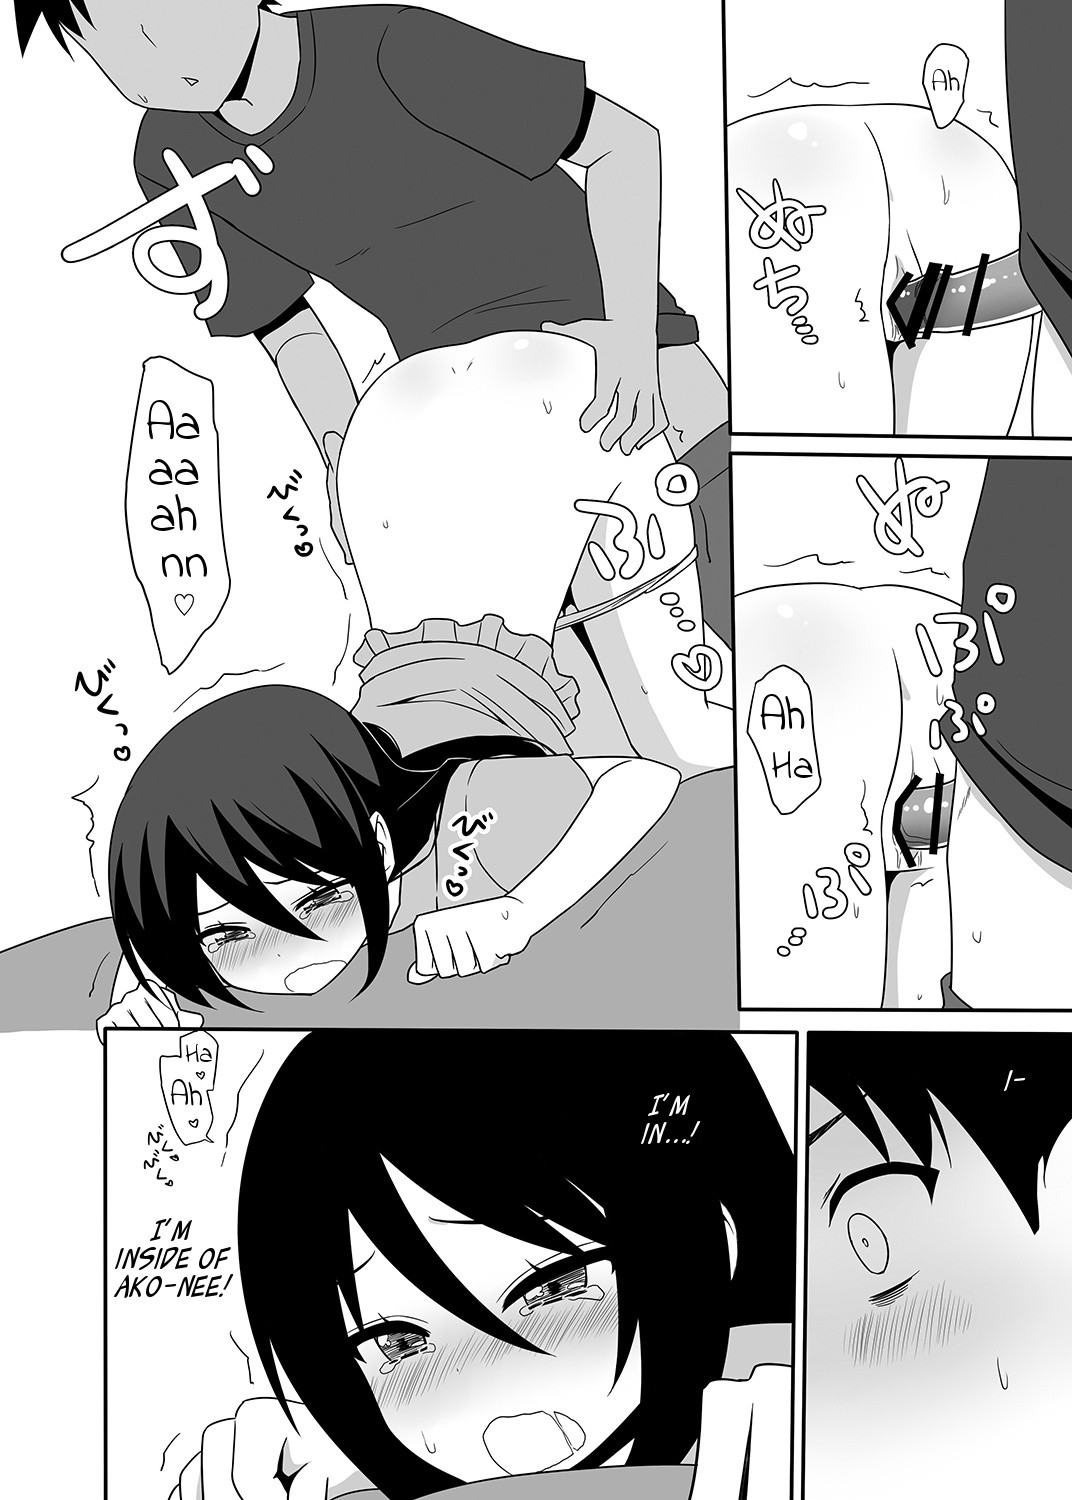 The day I went over the line with Ako-nee hentai manga picture 11